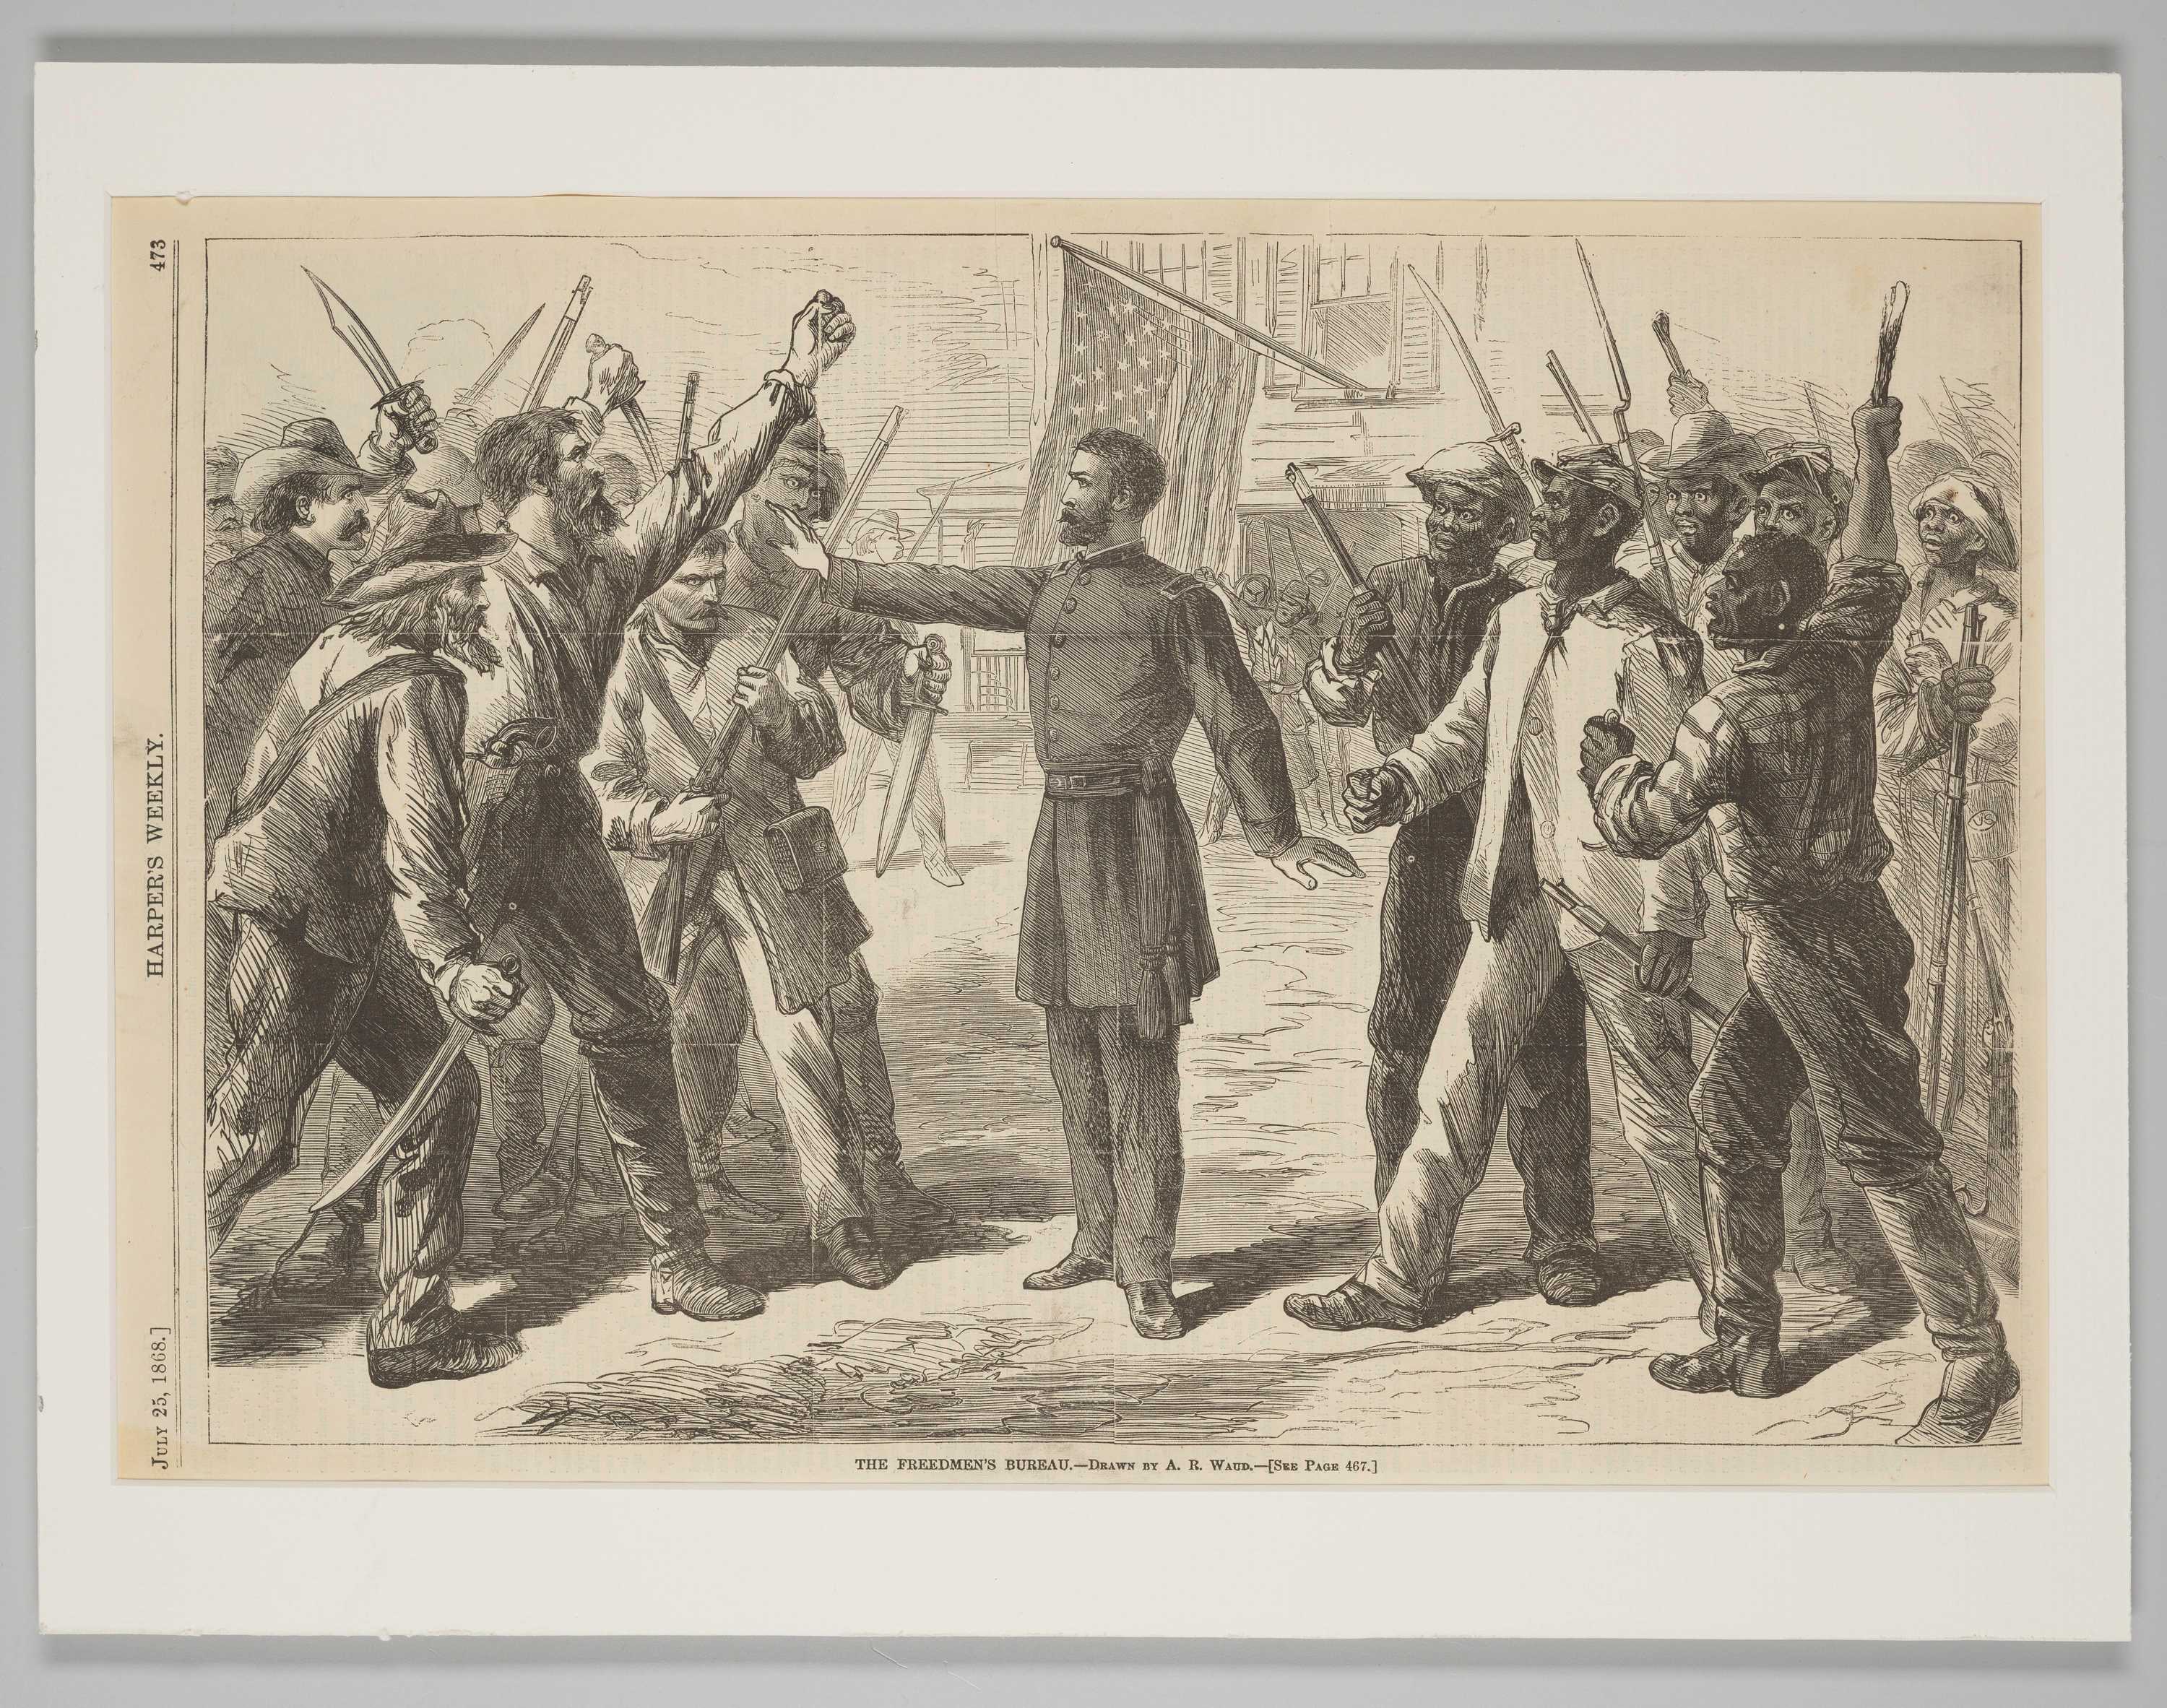 A page from Harper's Weekly with a black-and-white print of a wood engraving depicting a uniformed figure representing the Freedmen's Bureau at center holding out his hand to stop a group of white men from advancing on a group of Black men. The two groups face each other from opposite sides of the image, with figures on both sides holding guns and other weapons. A United States flag hangs from a building in the background. Along the bottom of the image is printed "THE FREEDMEN'S BUREAU. - DRAWN BY A.R. WAUD. - [SEE PAGE 467.]." Along the left margin is printed "JULY 23, 1868." at the bottom, "HARPER'S WEEKLY" at center and "473" at top.